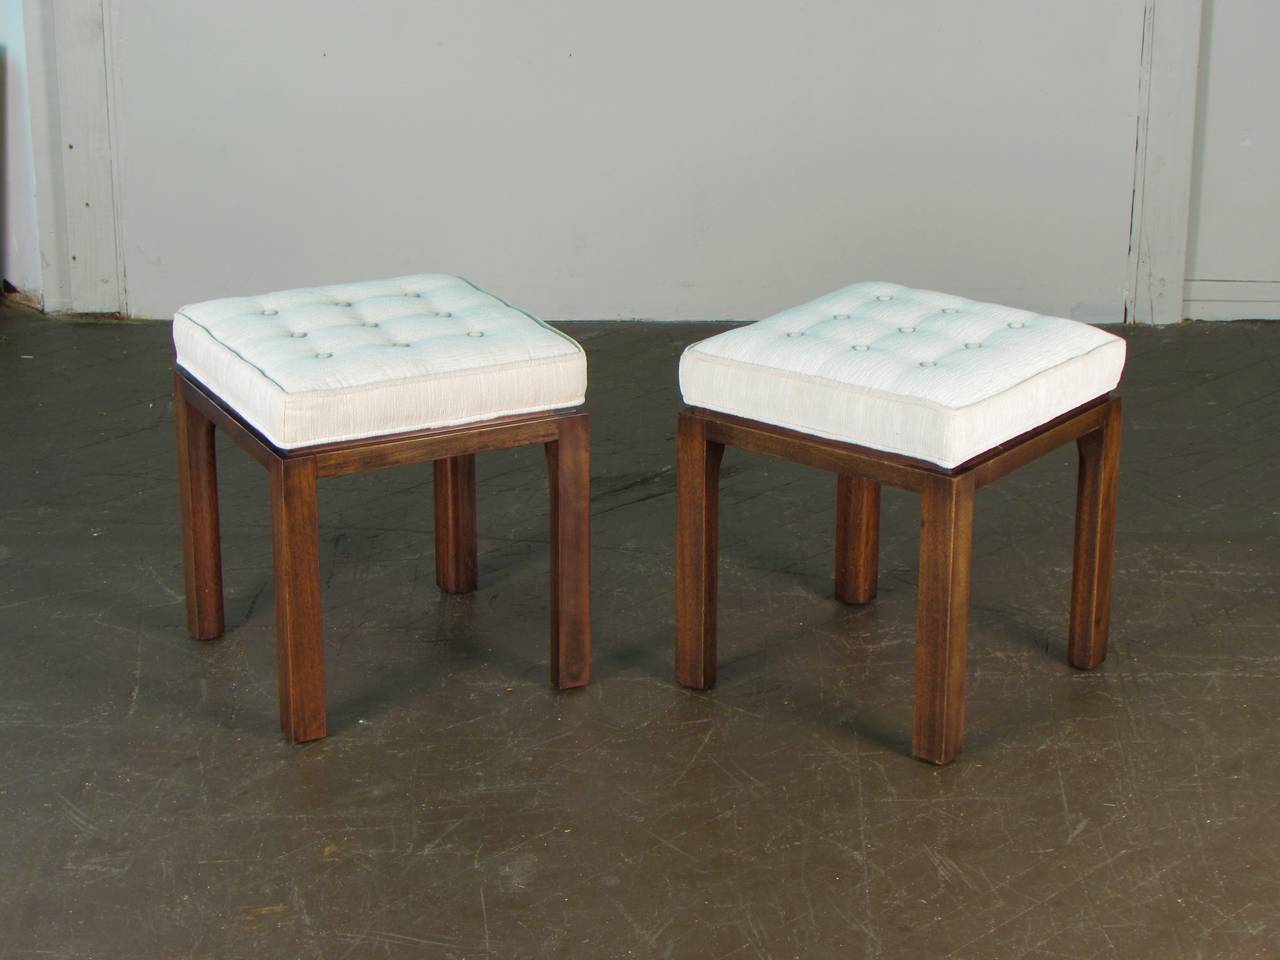 Stately pair of signed upholstered stools or benches by Harvey Probber, 1965. These stools have been refinished and reupholster in a texted cream velvet. Condition is immaculate.

We offer free regular deliveries to NYC and Philadelphia area.